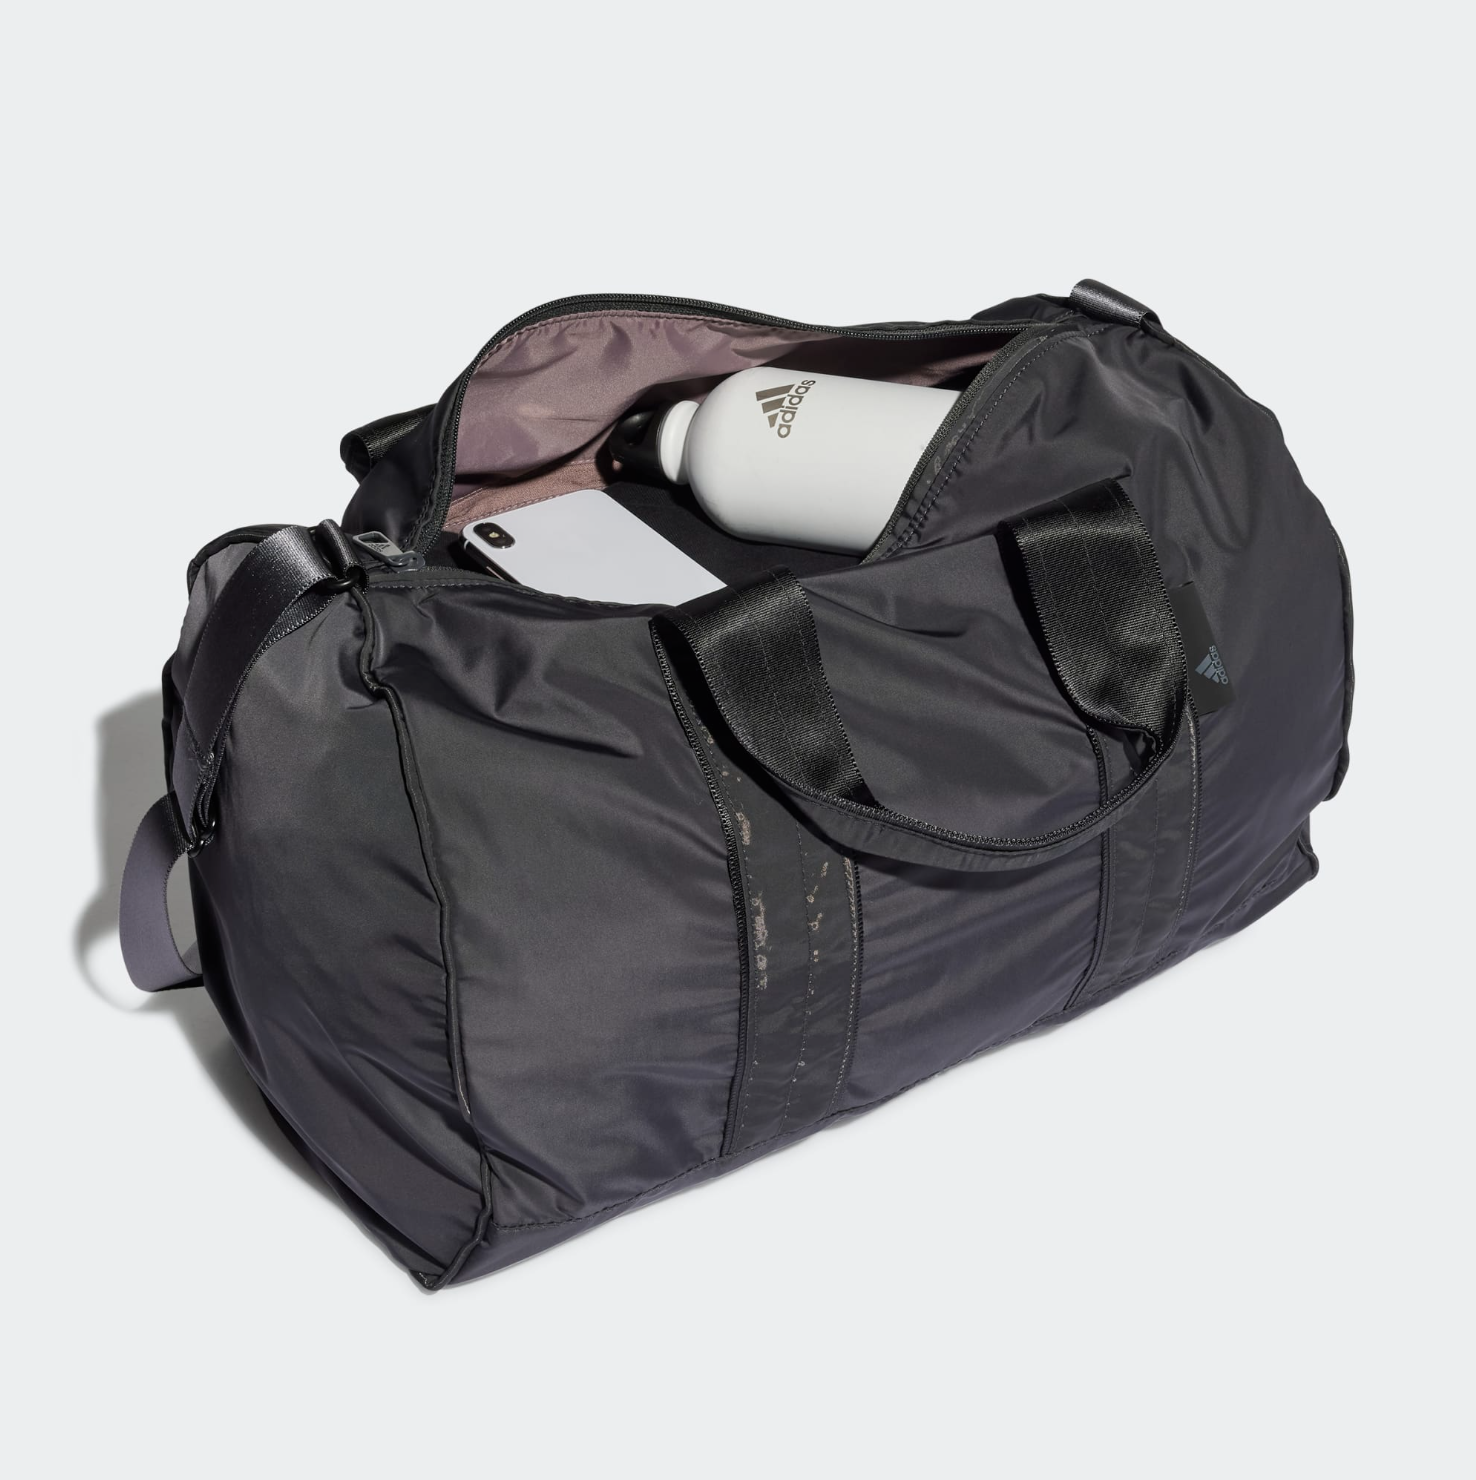 The duffle bag filled with a phone, water bottle, and clothes